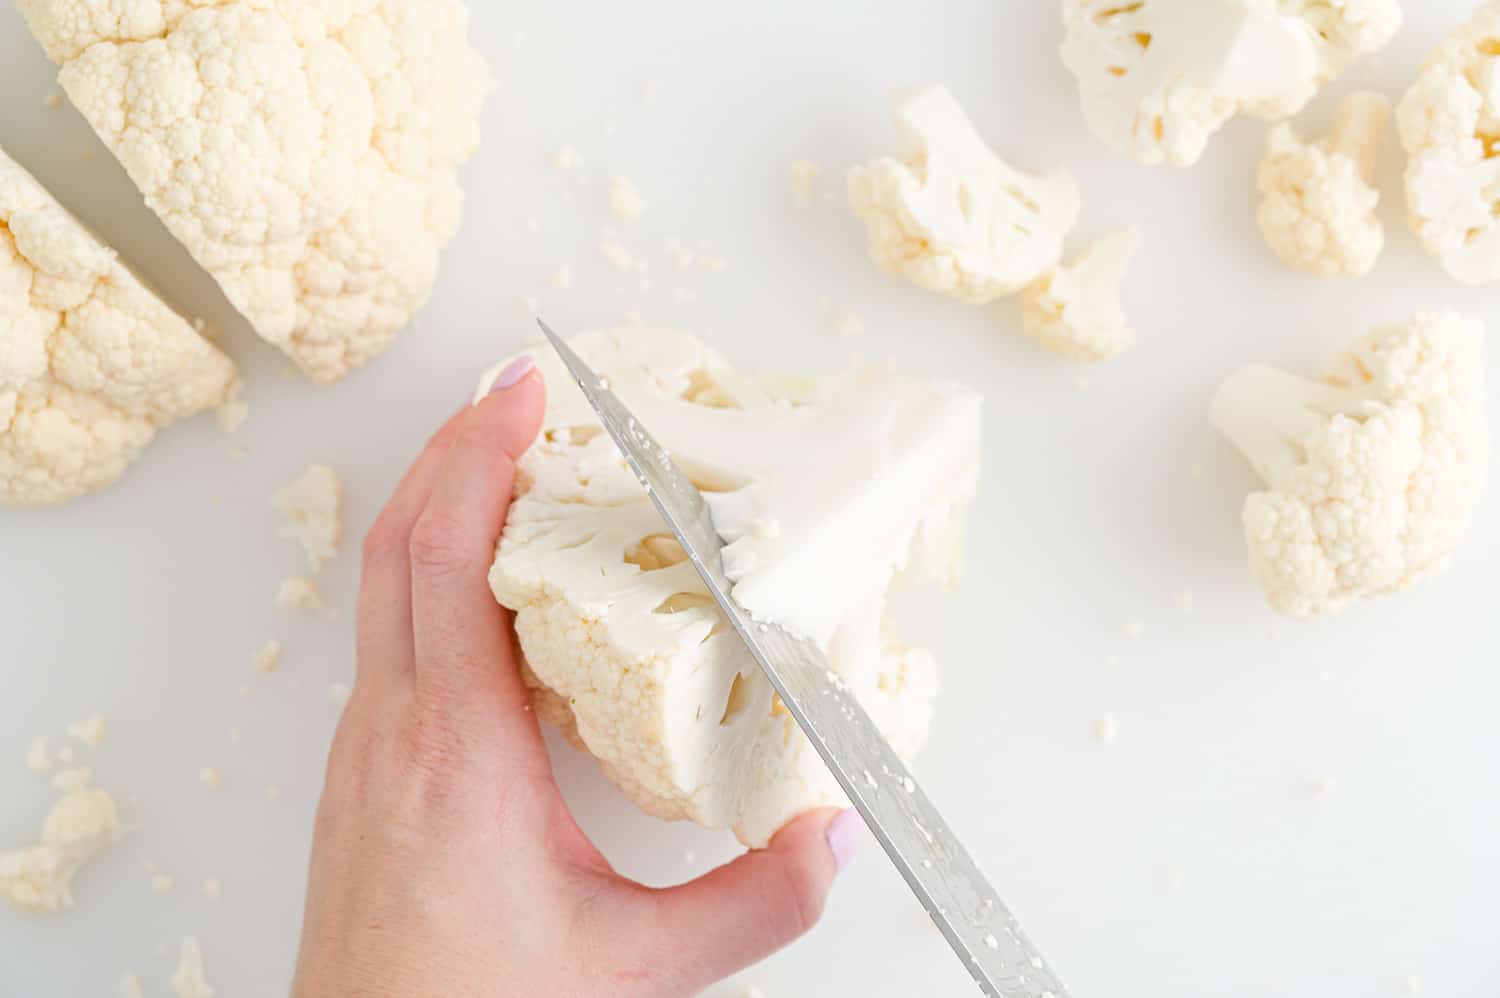 Core of cauliflower being cut out of a quarter of a head of cauliflower.